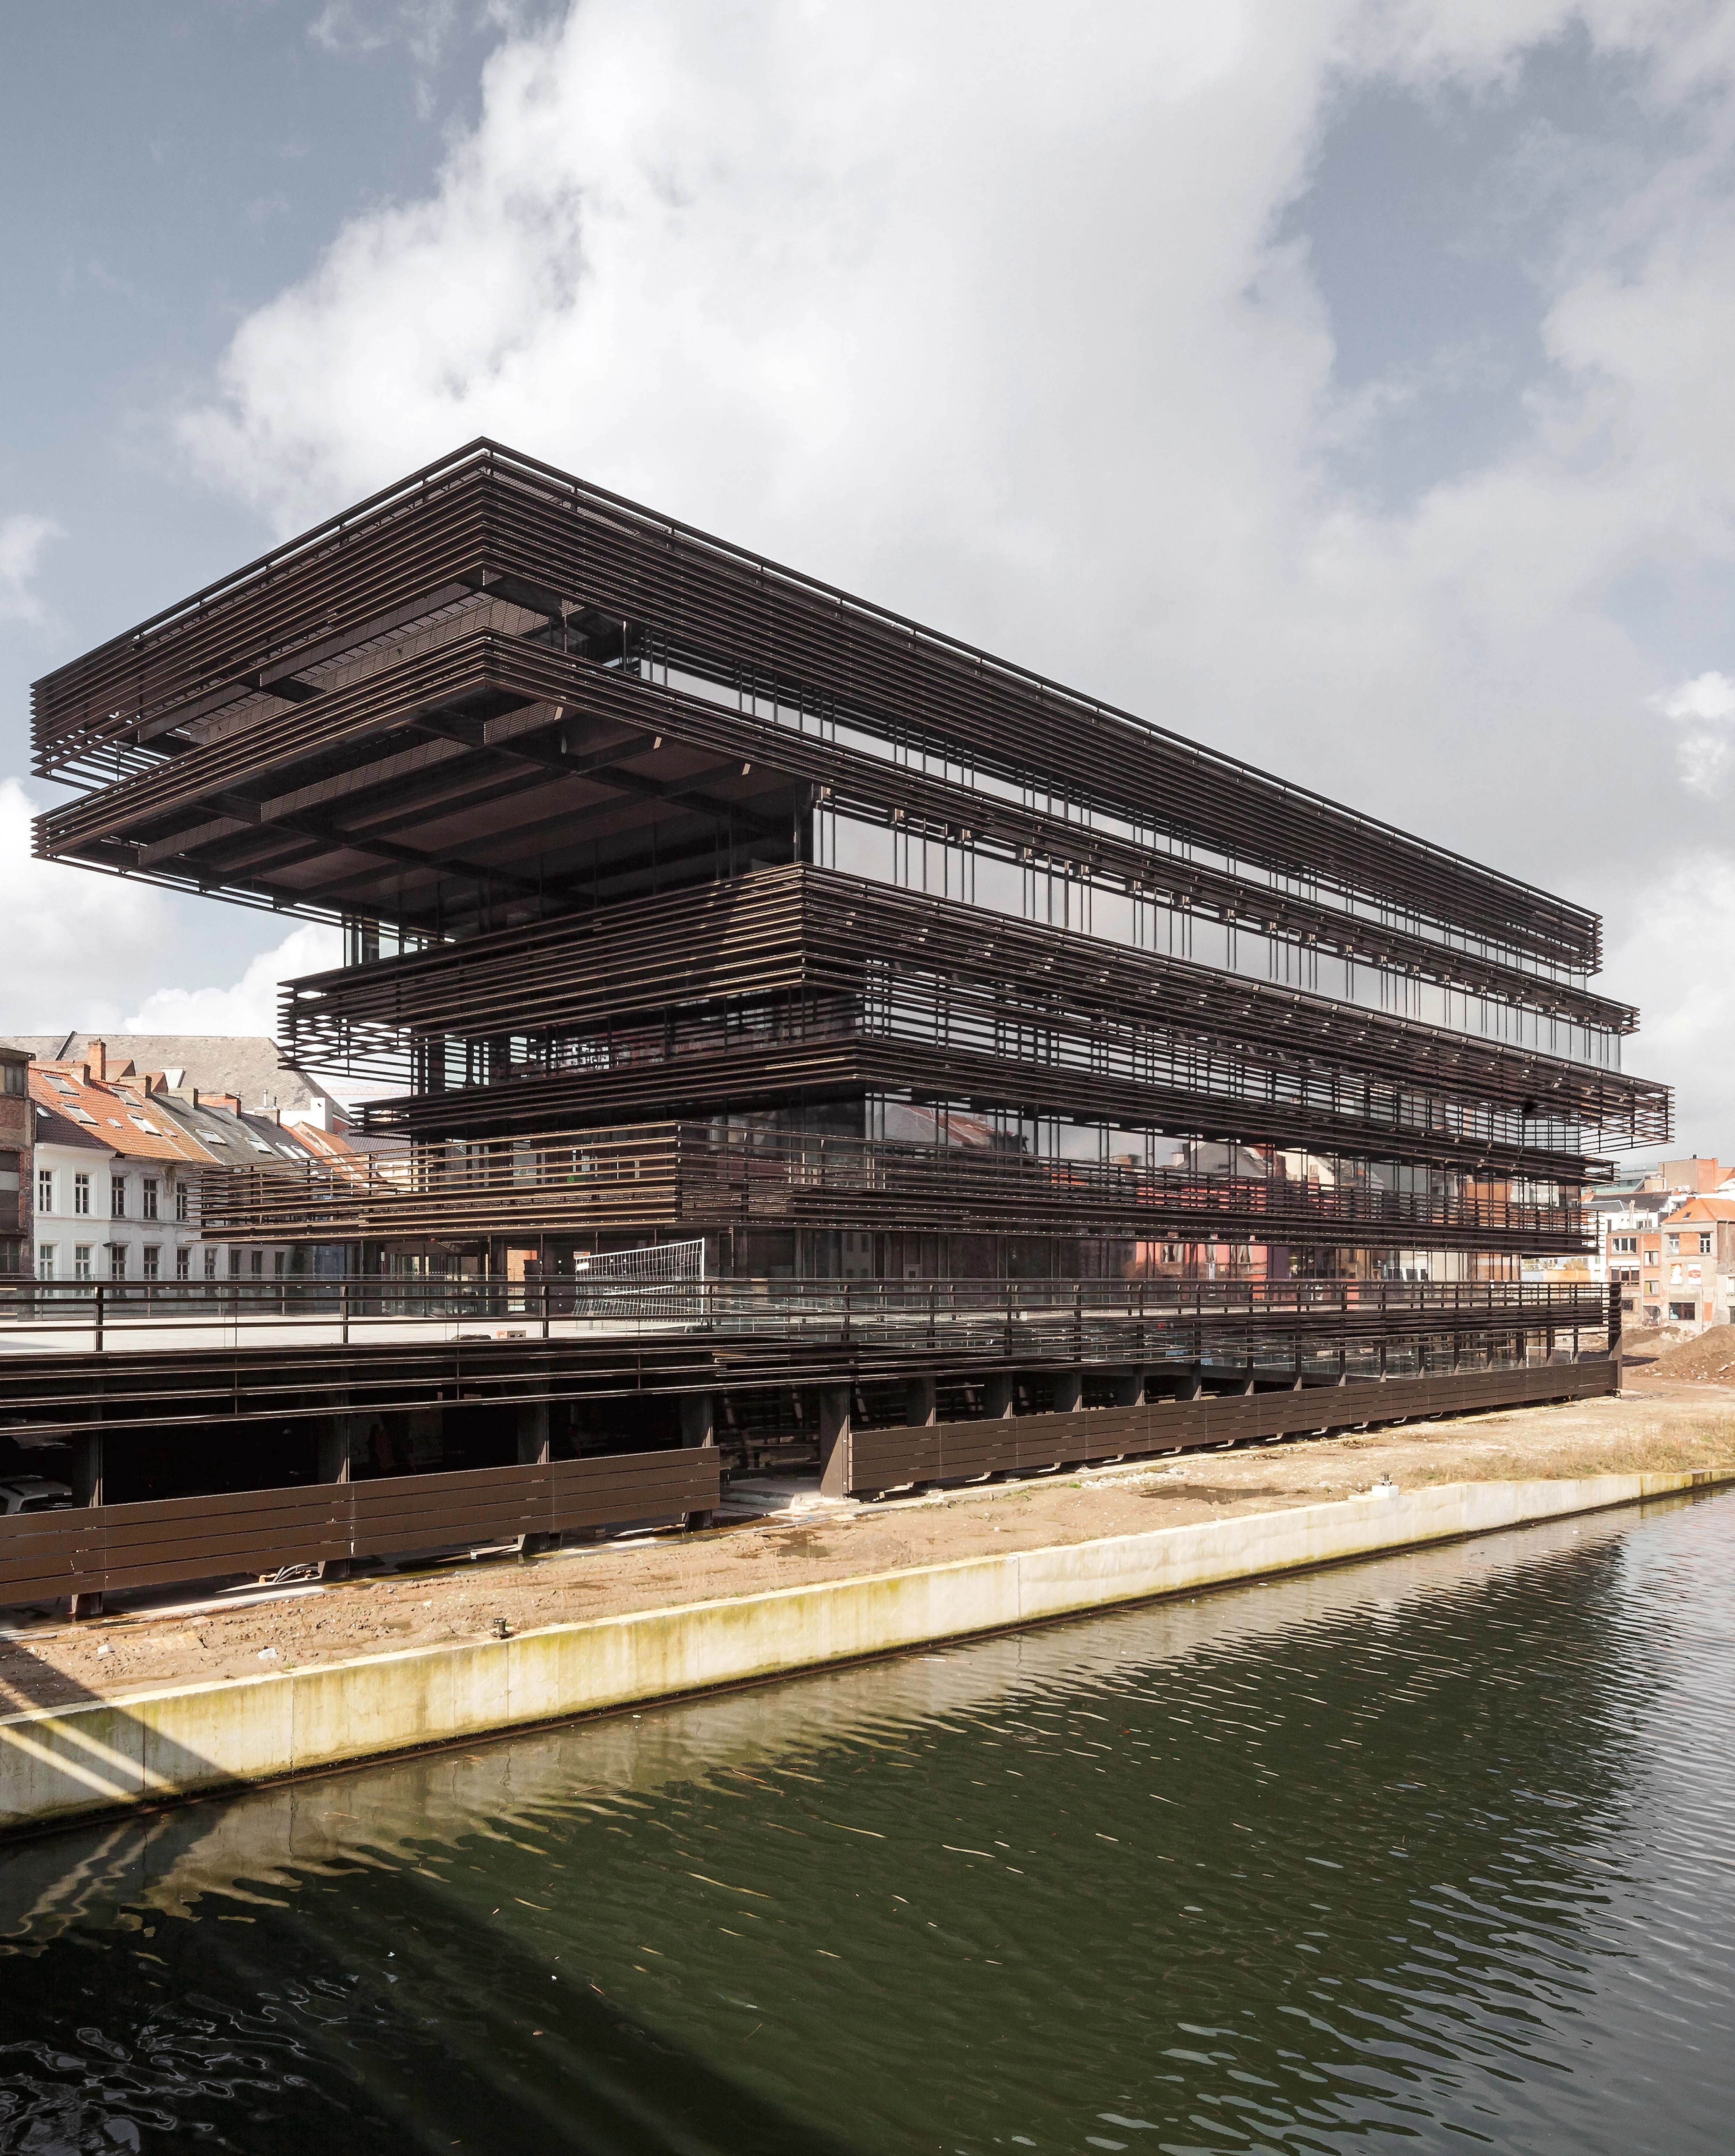 Media Library in Ghent